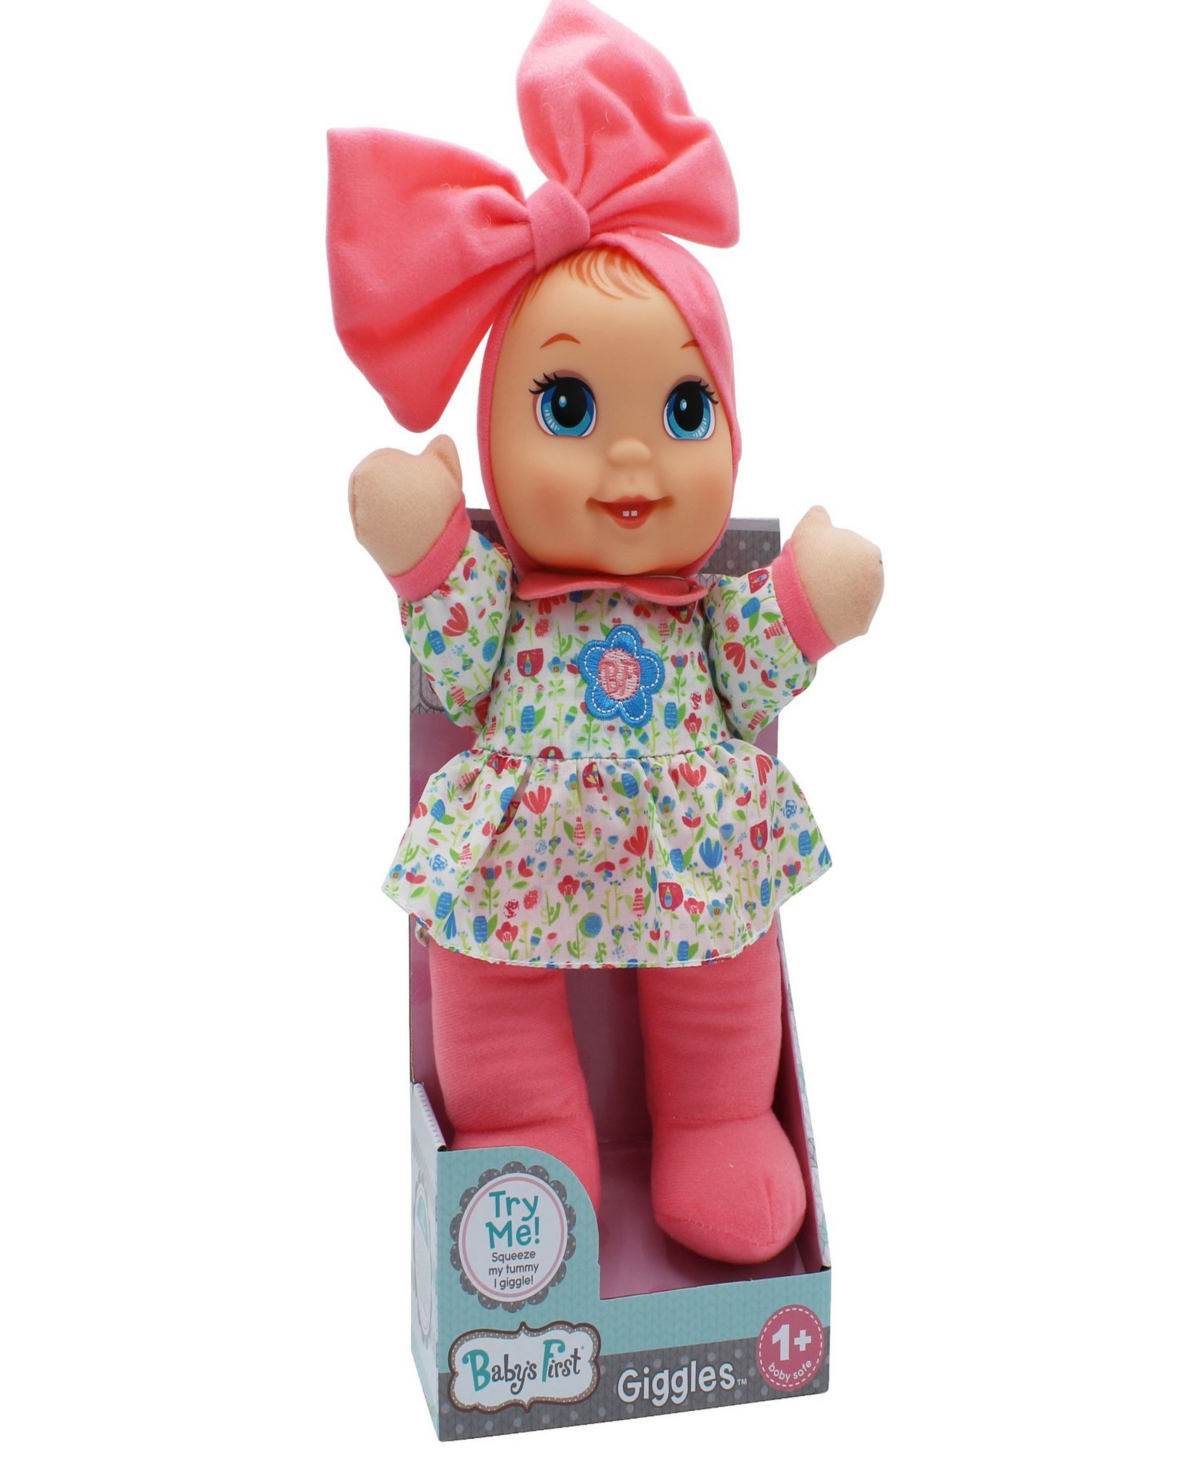 Baby's First By Nemcor Giggles Baby Doll Toy With Floral Top In Multi